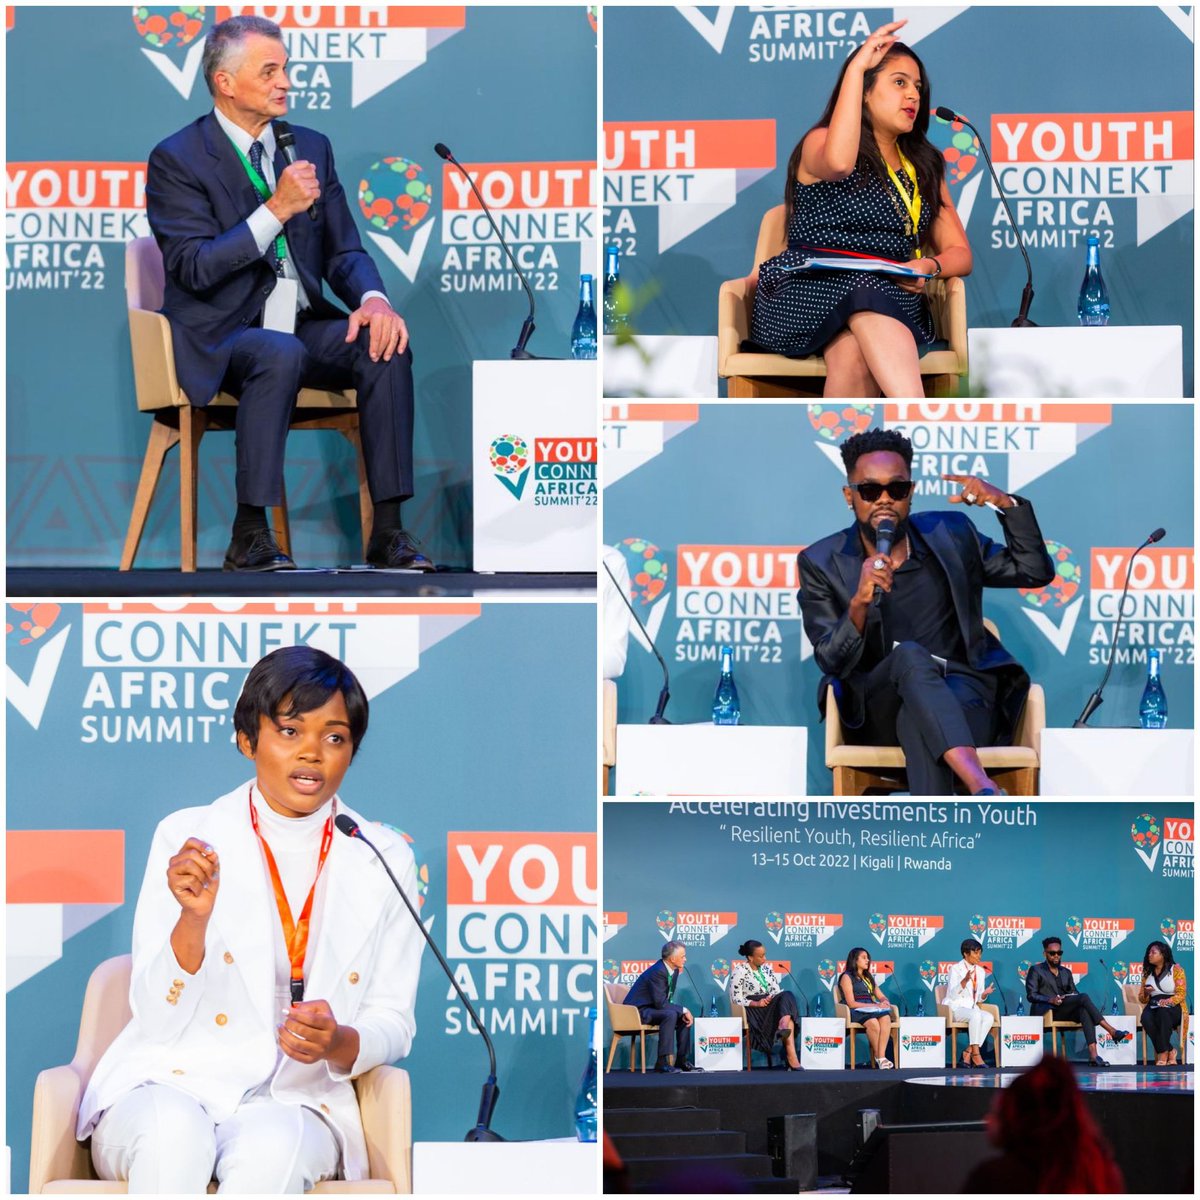 If we spent less time contesting the truth & more time implementing solutions, our 🌍 would be in a better shape. Glad to see #youth could discuss the issue at #YouthConnekt2022 today w/ @UNDP Chief of Staff Michele Candotti, Activist Rawe Kefi, @JuvelineNgum & @patorankingfire